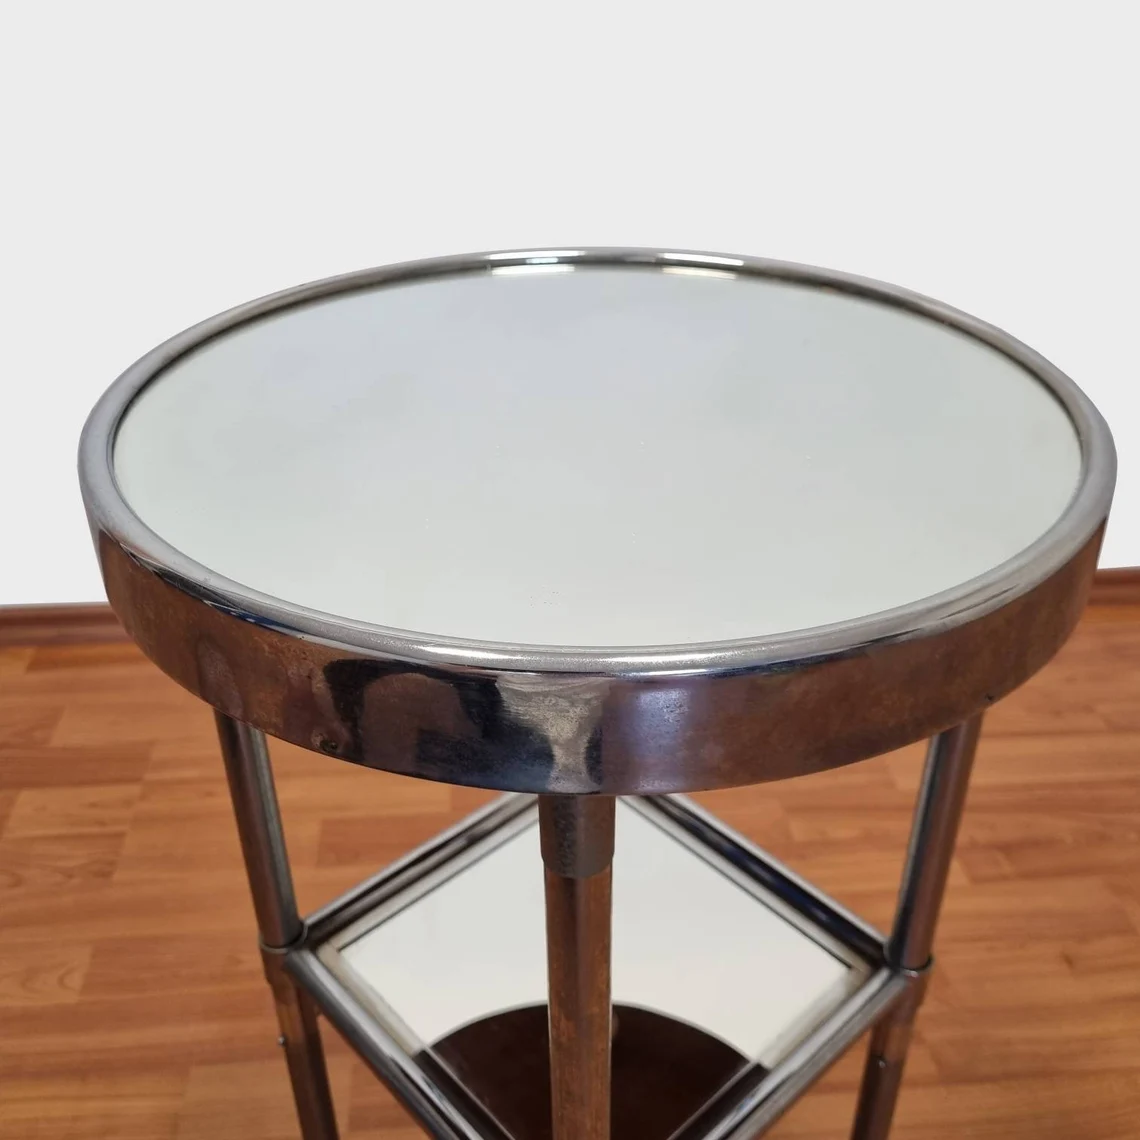 Vintage Mirrored Side Table, Retro Bathroom Trolley, Bauhaus Style, Italy 70s